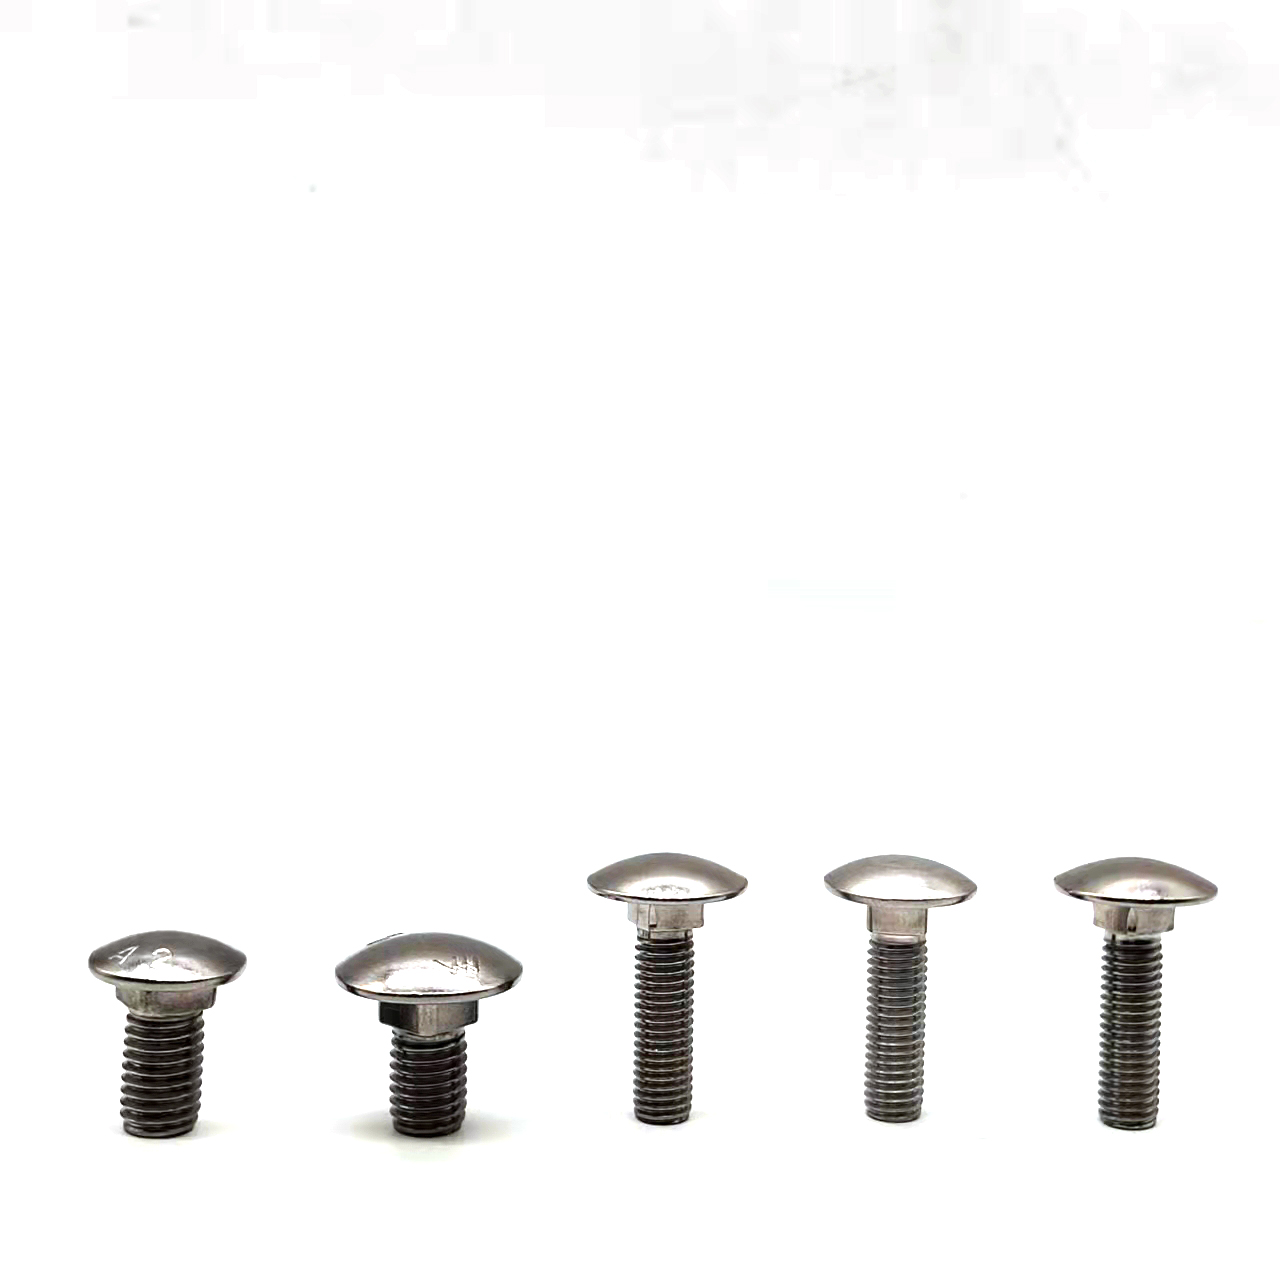 m12 stainless steel coach bolts